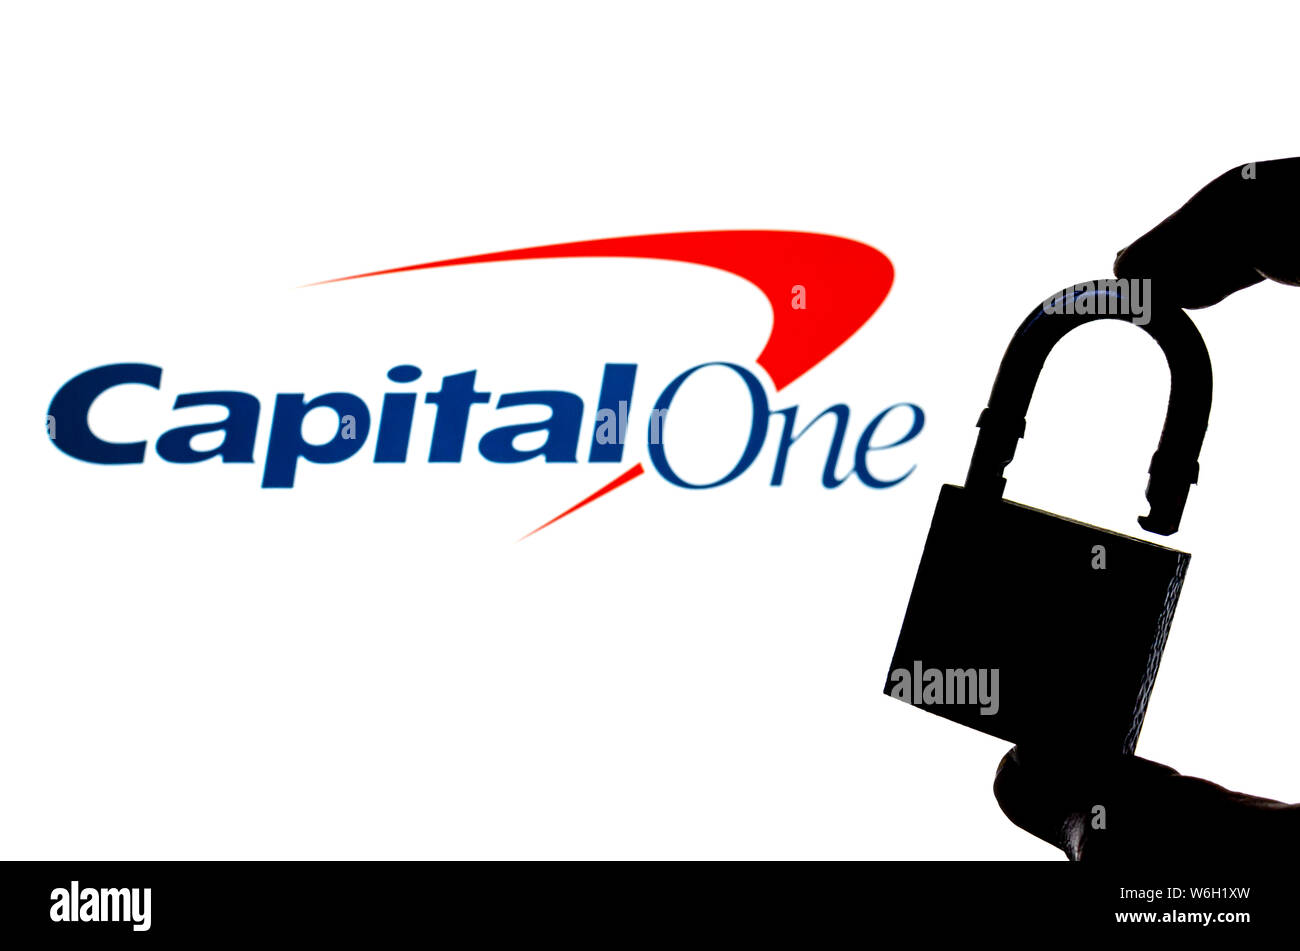 Capital One Bank logo on the background screen and a silhouette of the opened lock in front. Conceptual photo for news about the data breach. Stock Photo